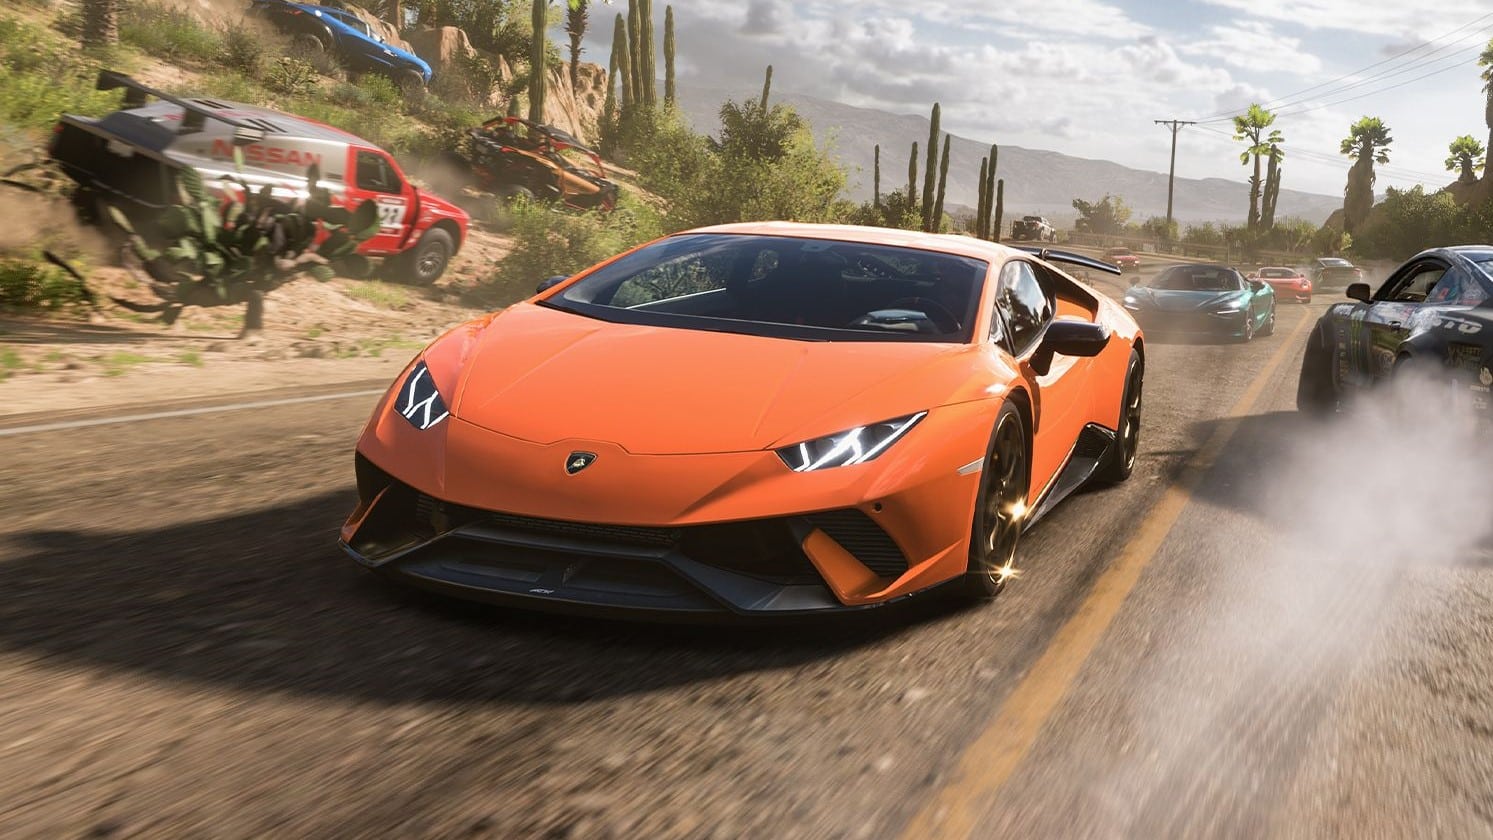 Forza Horizon 6 is reportedly in development: Possible release date and more